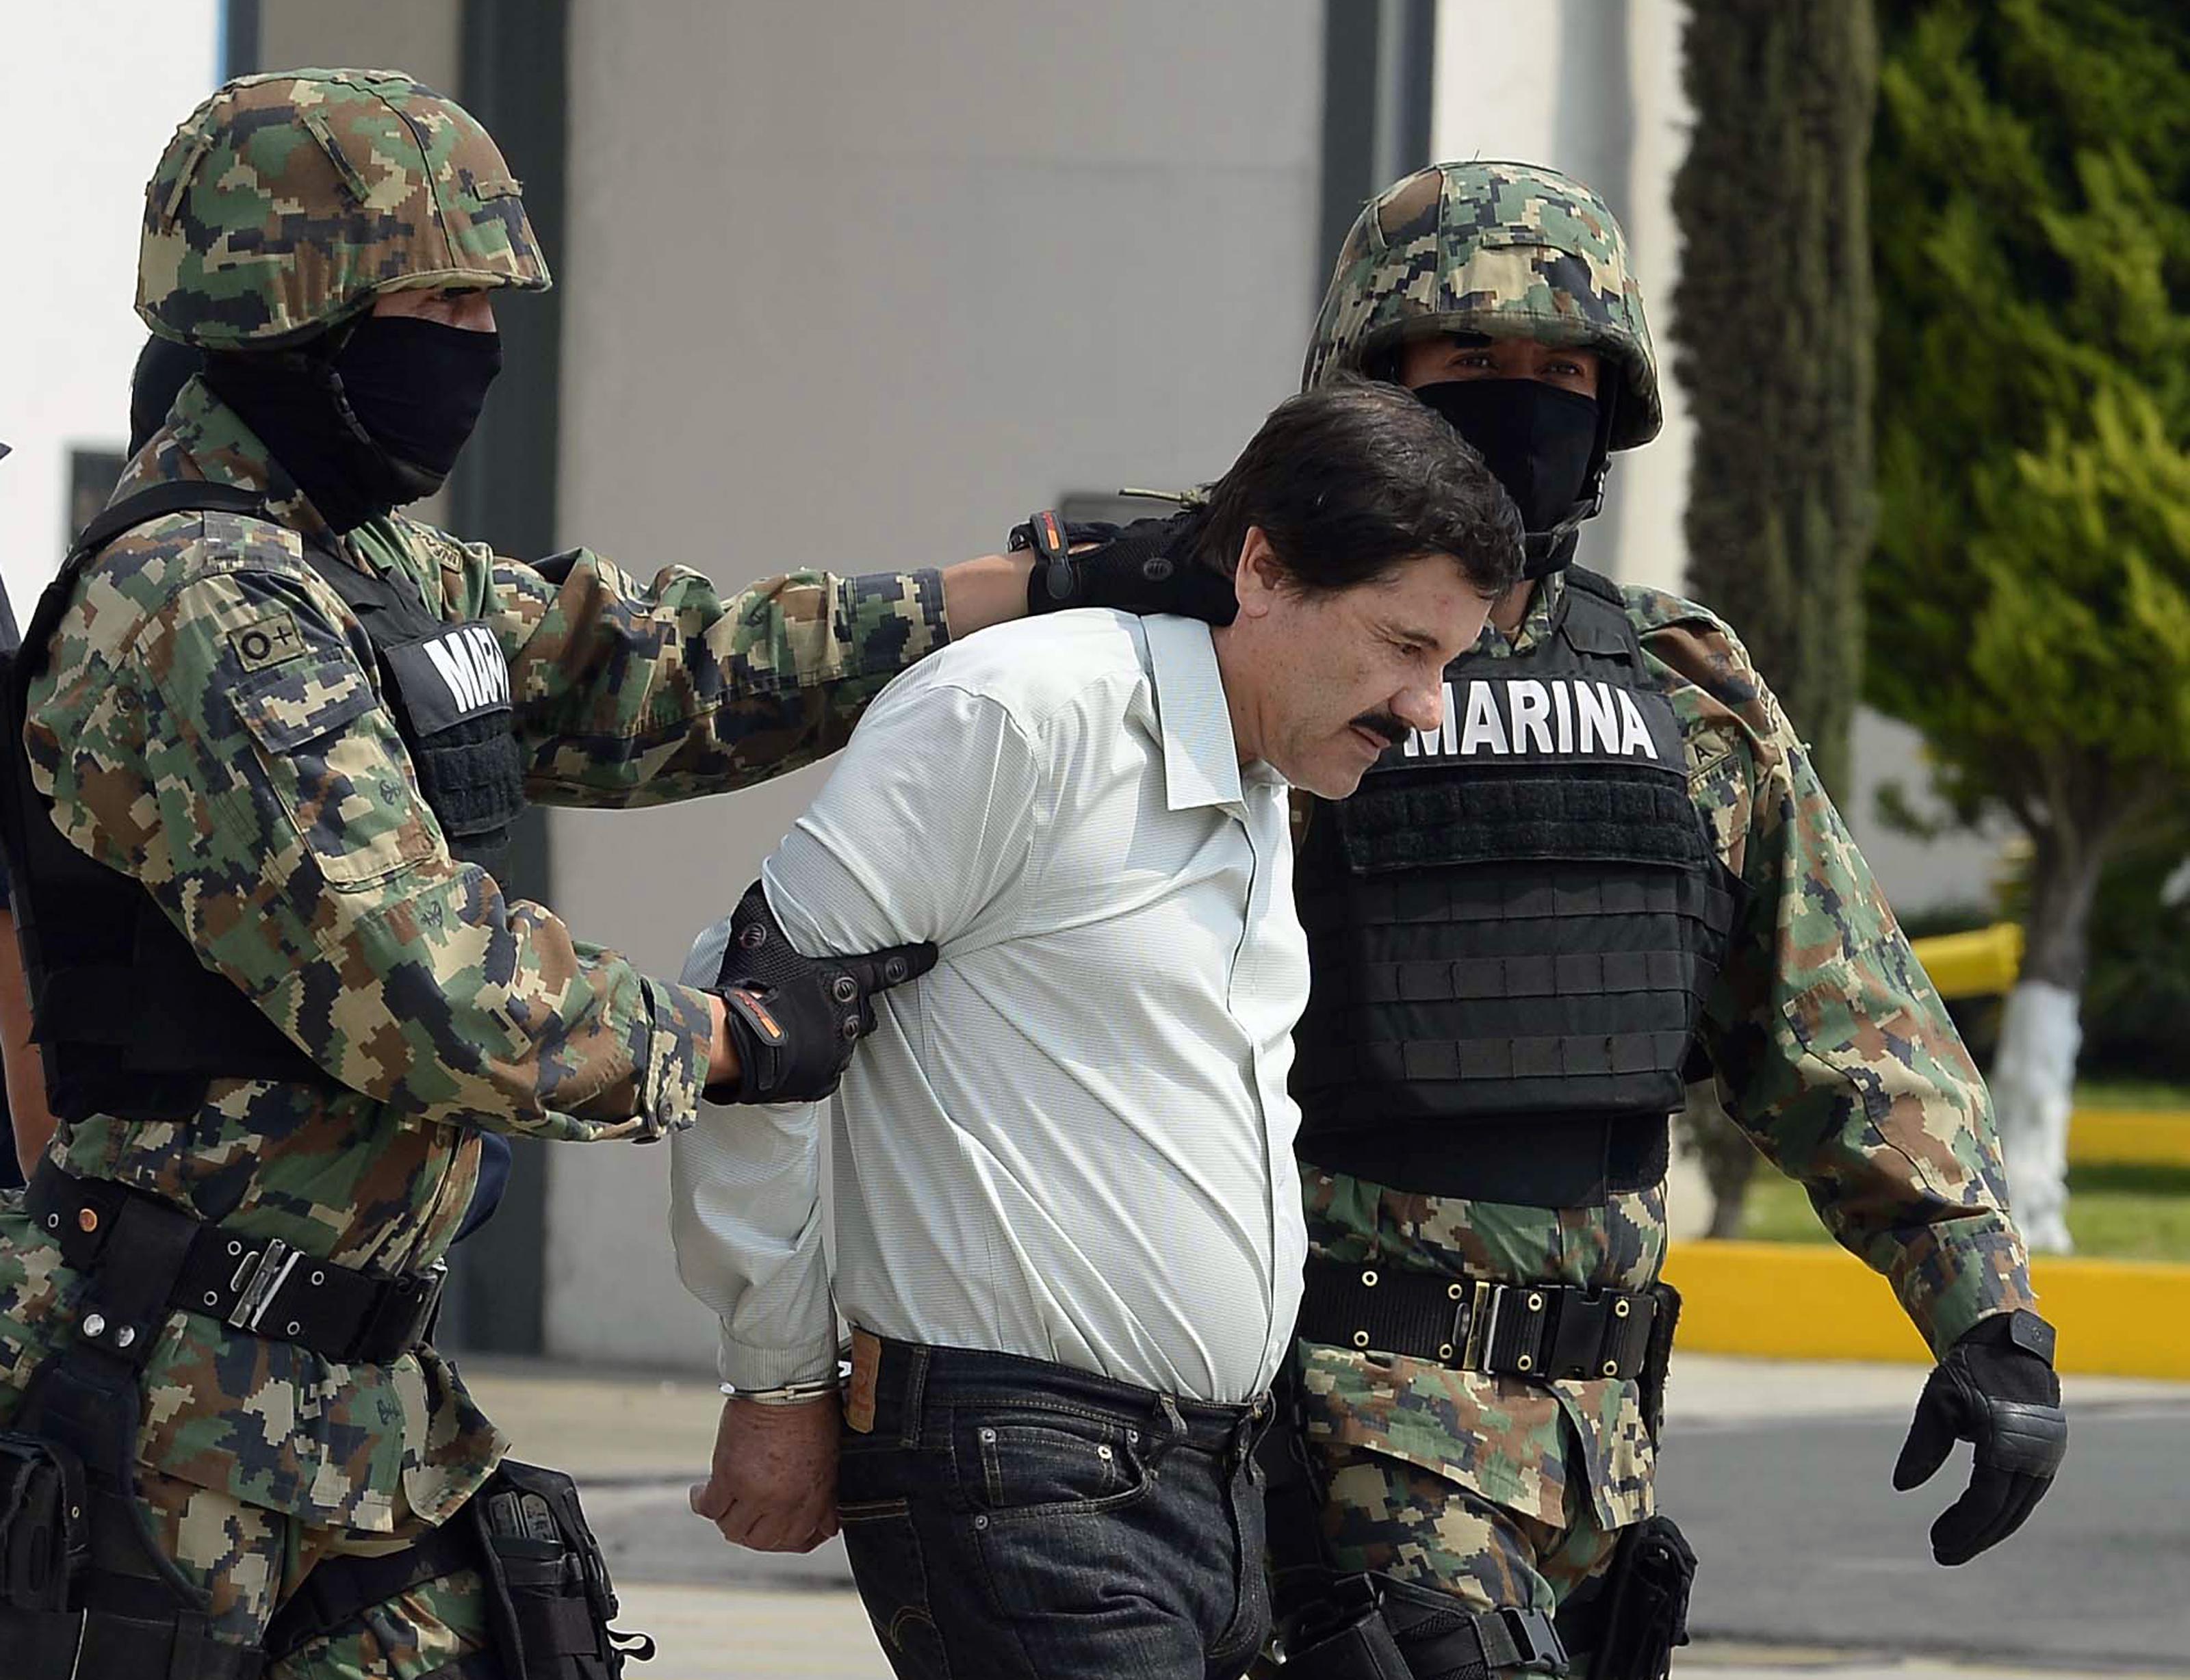 Marines present Mexican drug lord Joaquín “El Chapo” Guzmán to the press in Mexico City after his arrest on Feb. 22, 2014.